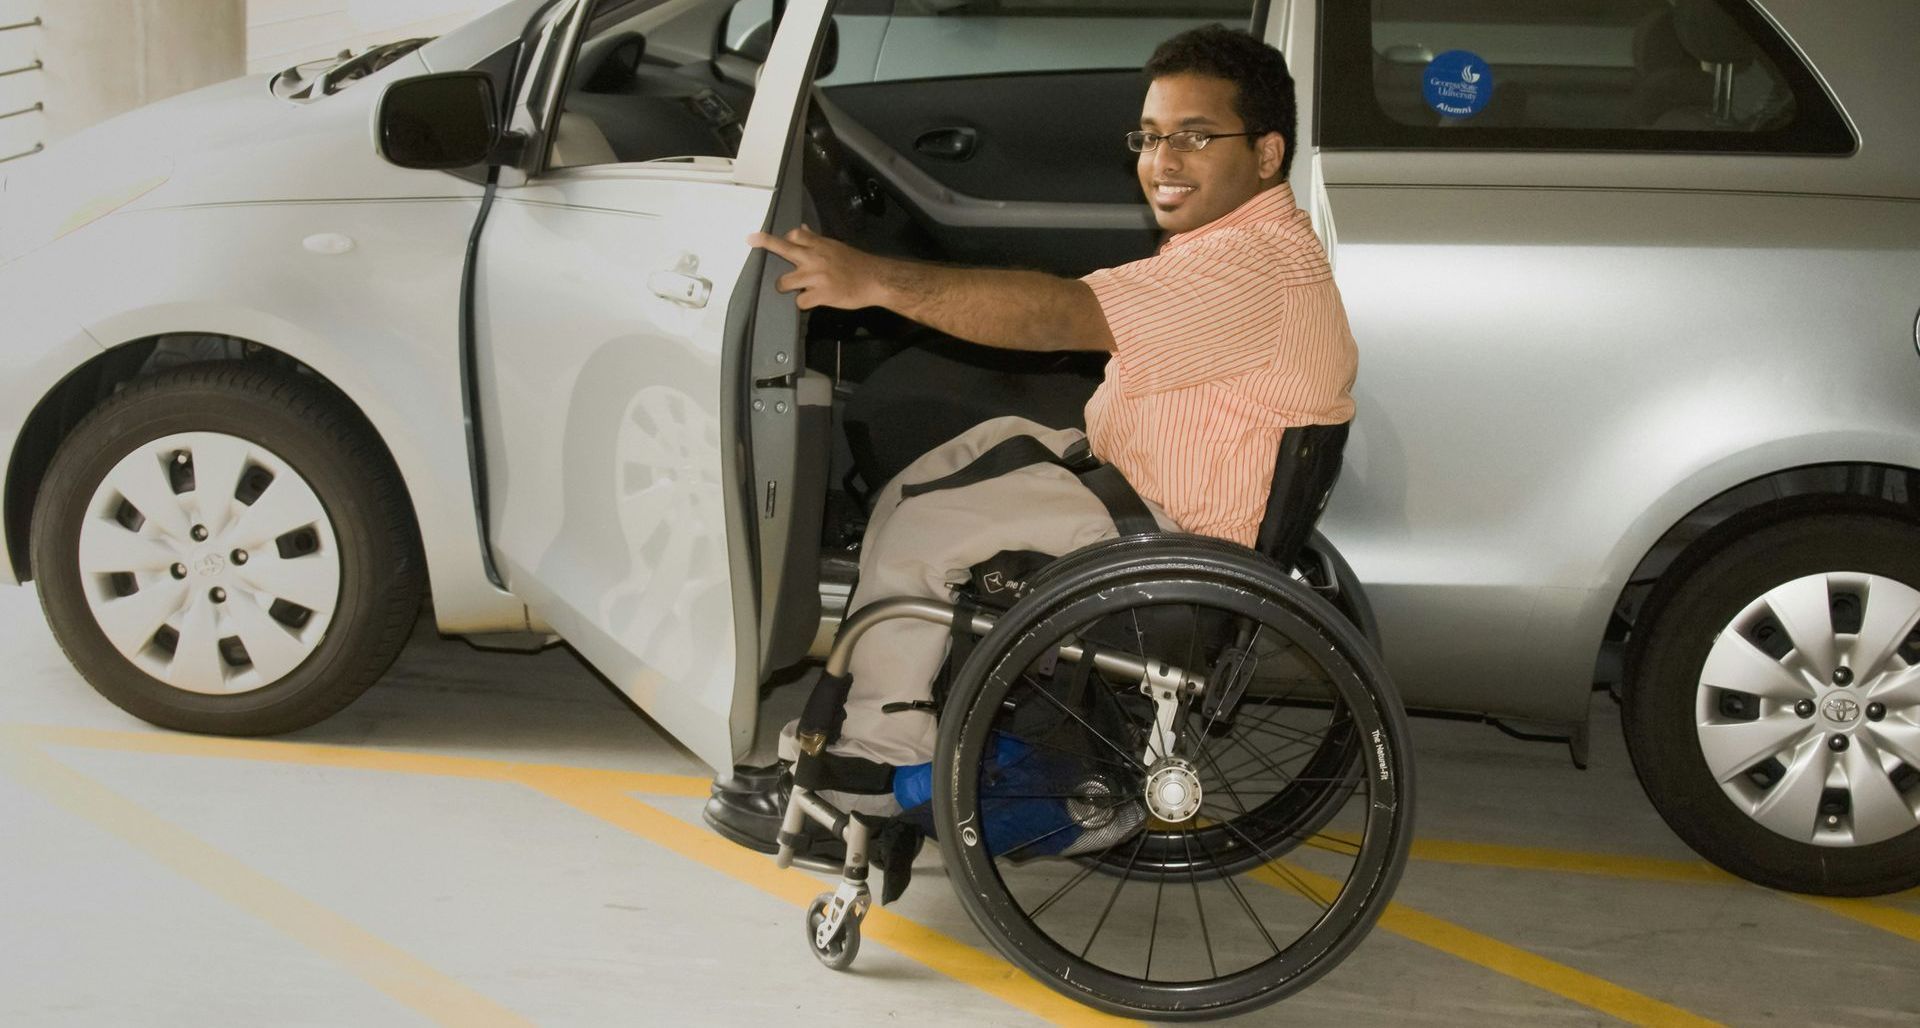 A man in a wheelchair is getting out of a car.